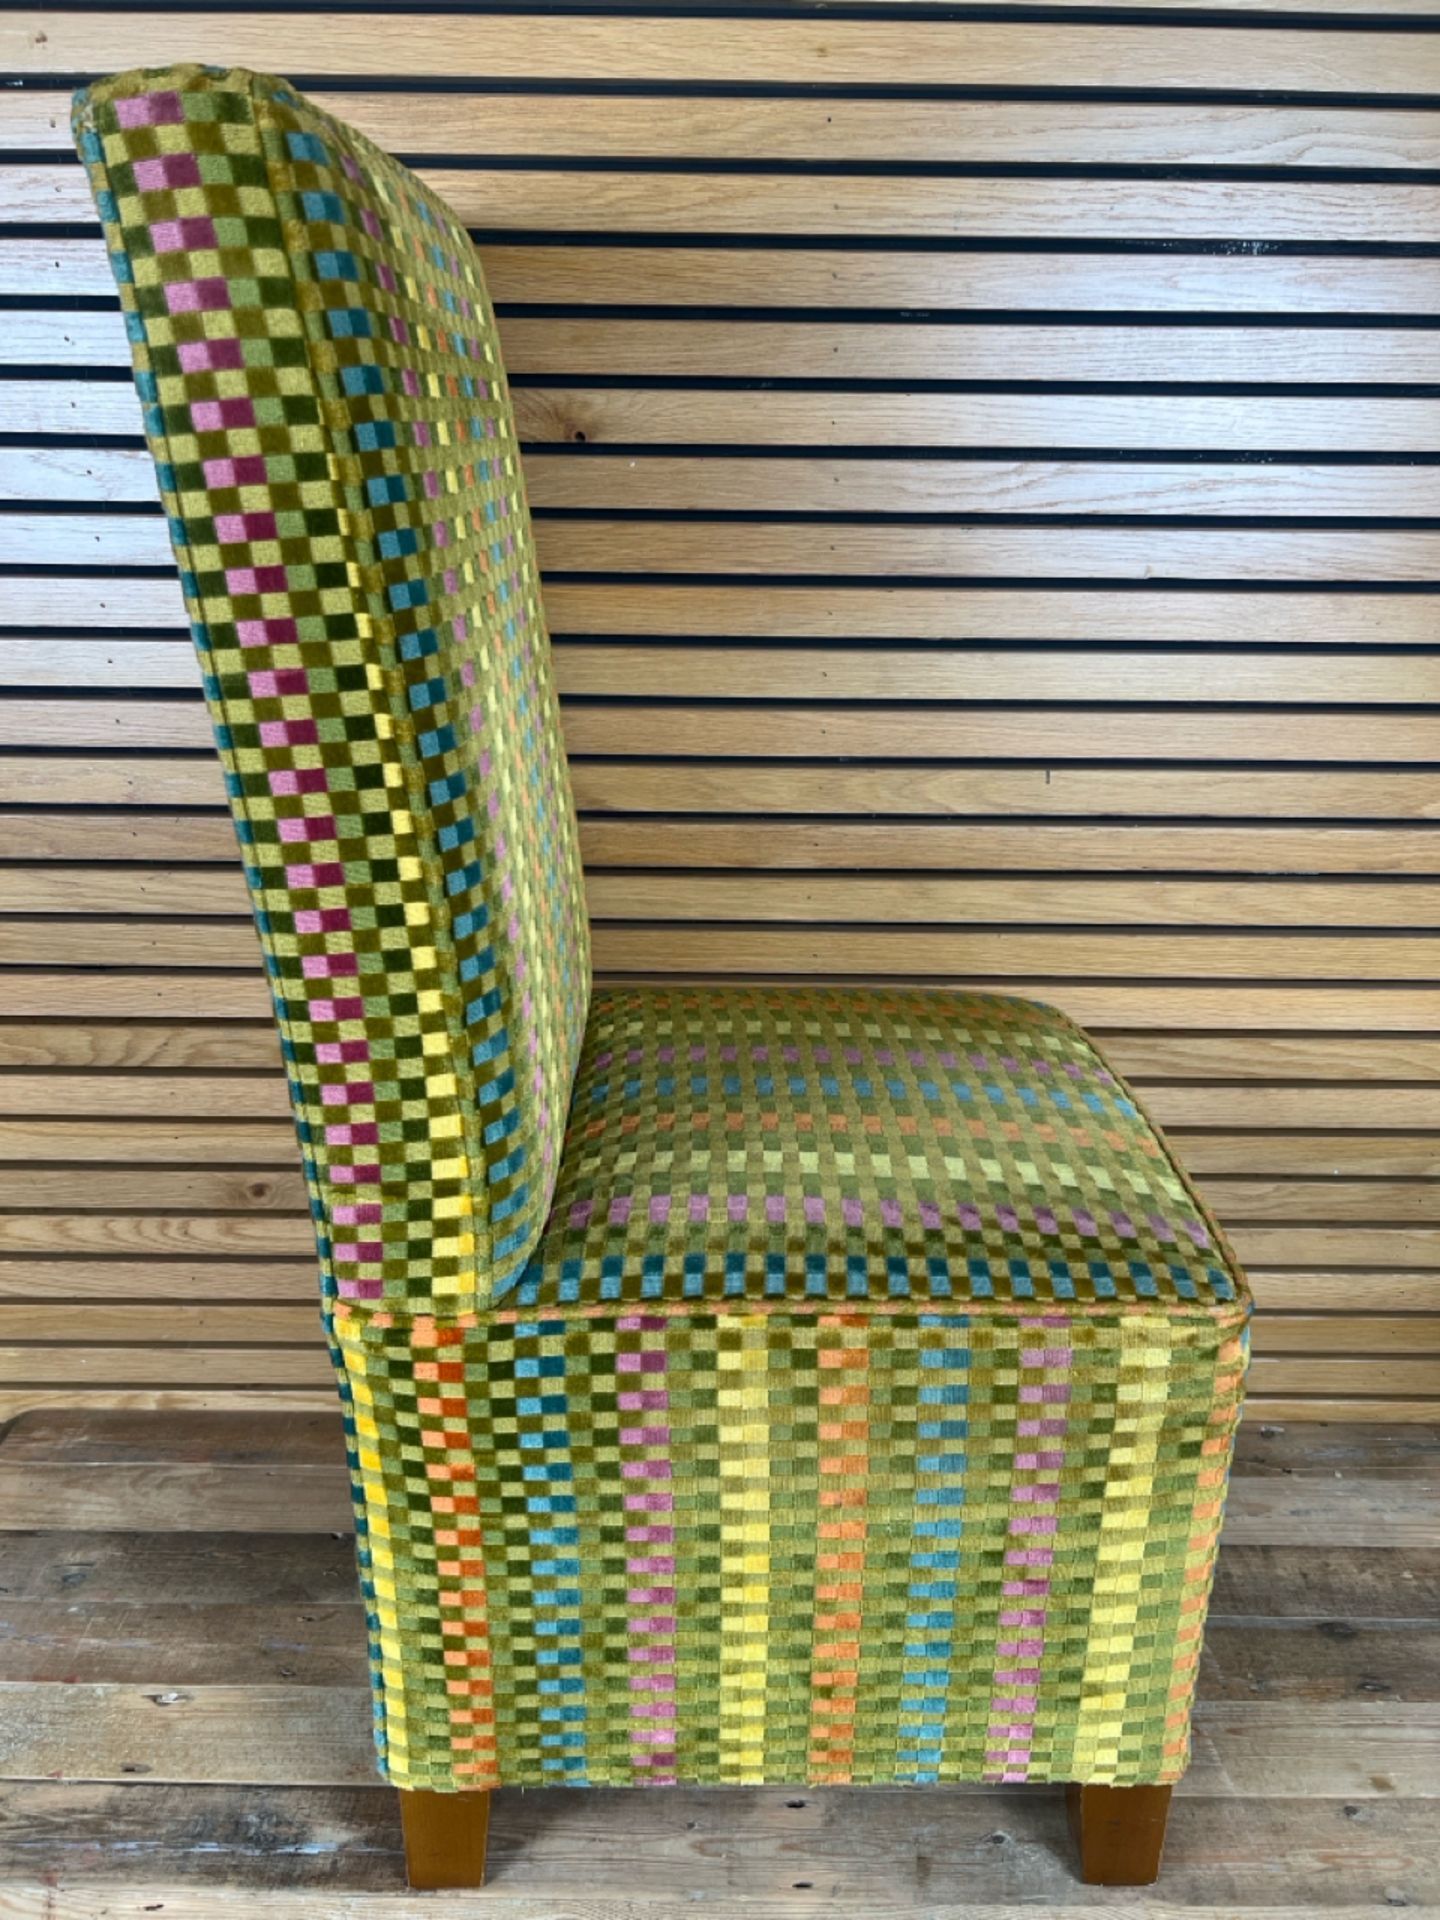 Fabric Patterned Chair - Image 2 of 3